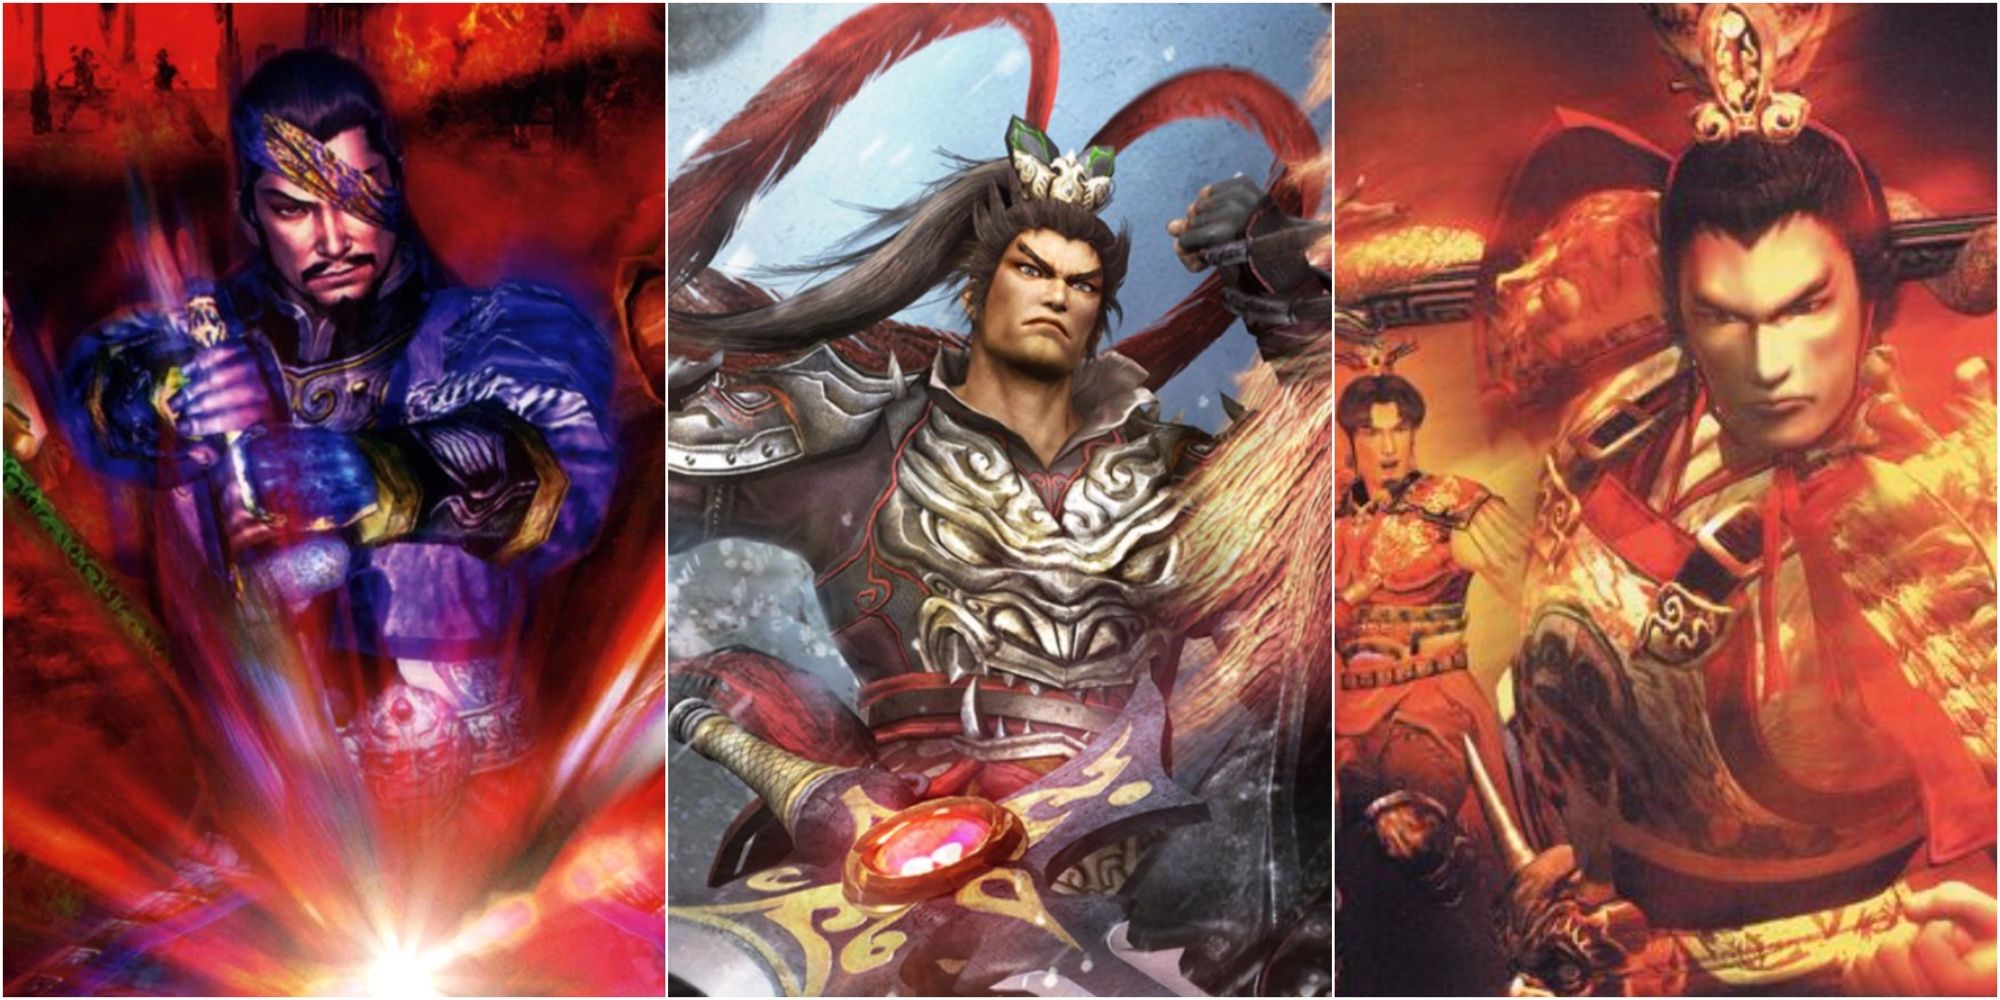 Multiple covers of the Dynasty Warriors Games